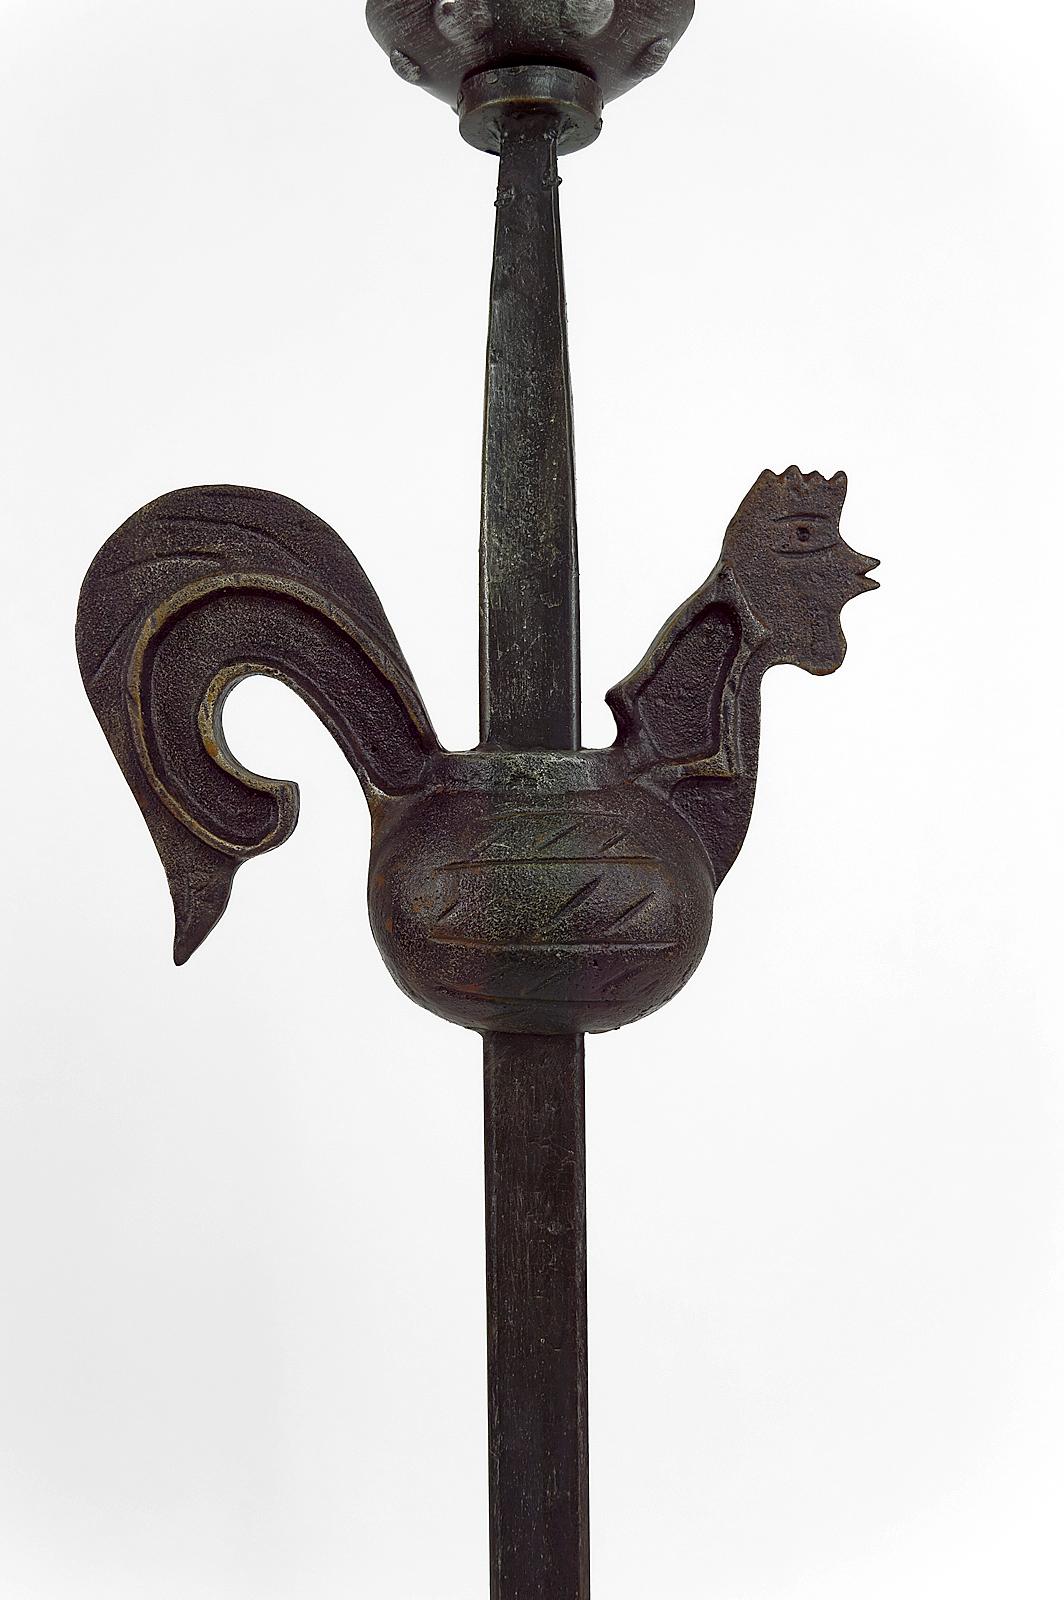 Rooster Floor Lamp in Wrought Iron by Jean Touret for Ateliers Marolles, 1950's For Sale 1